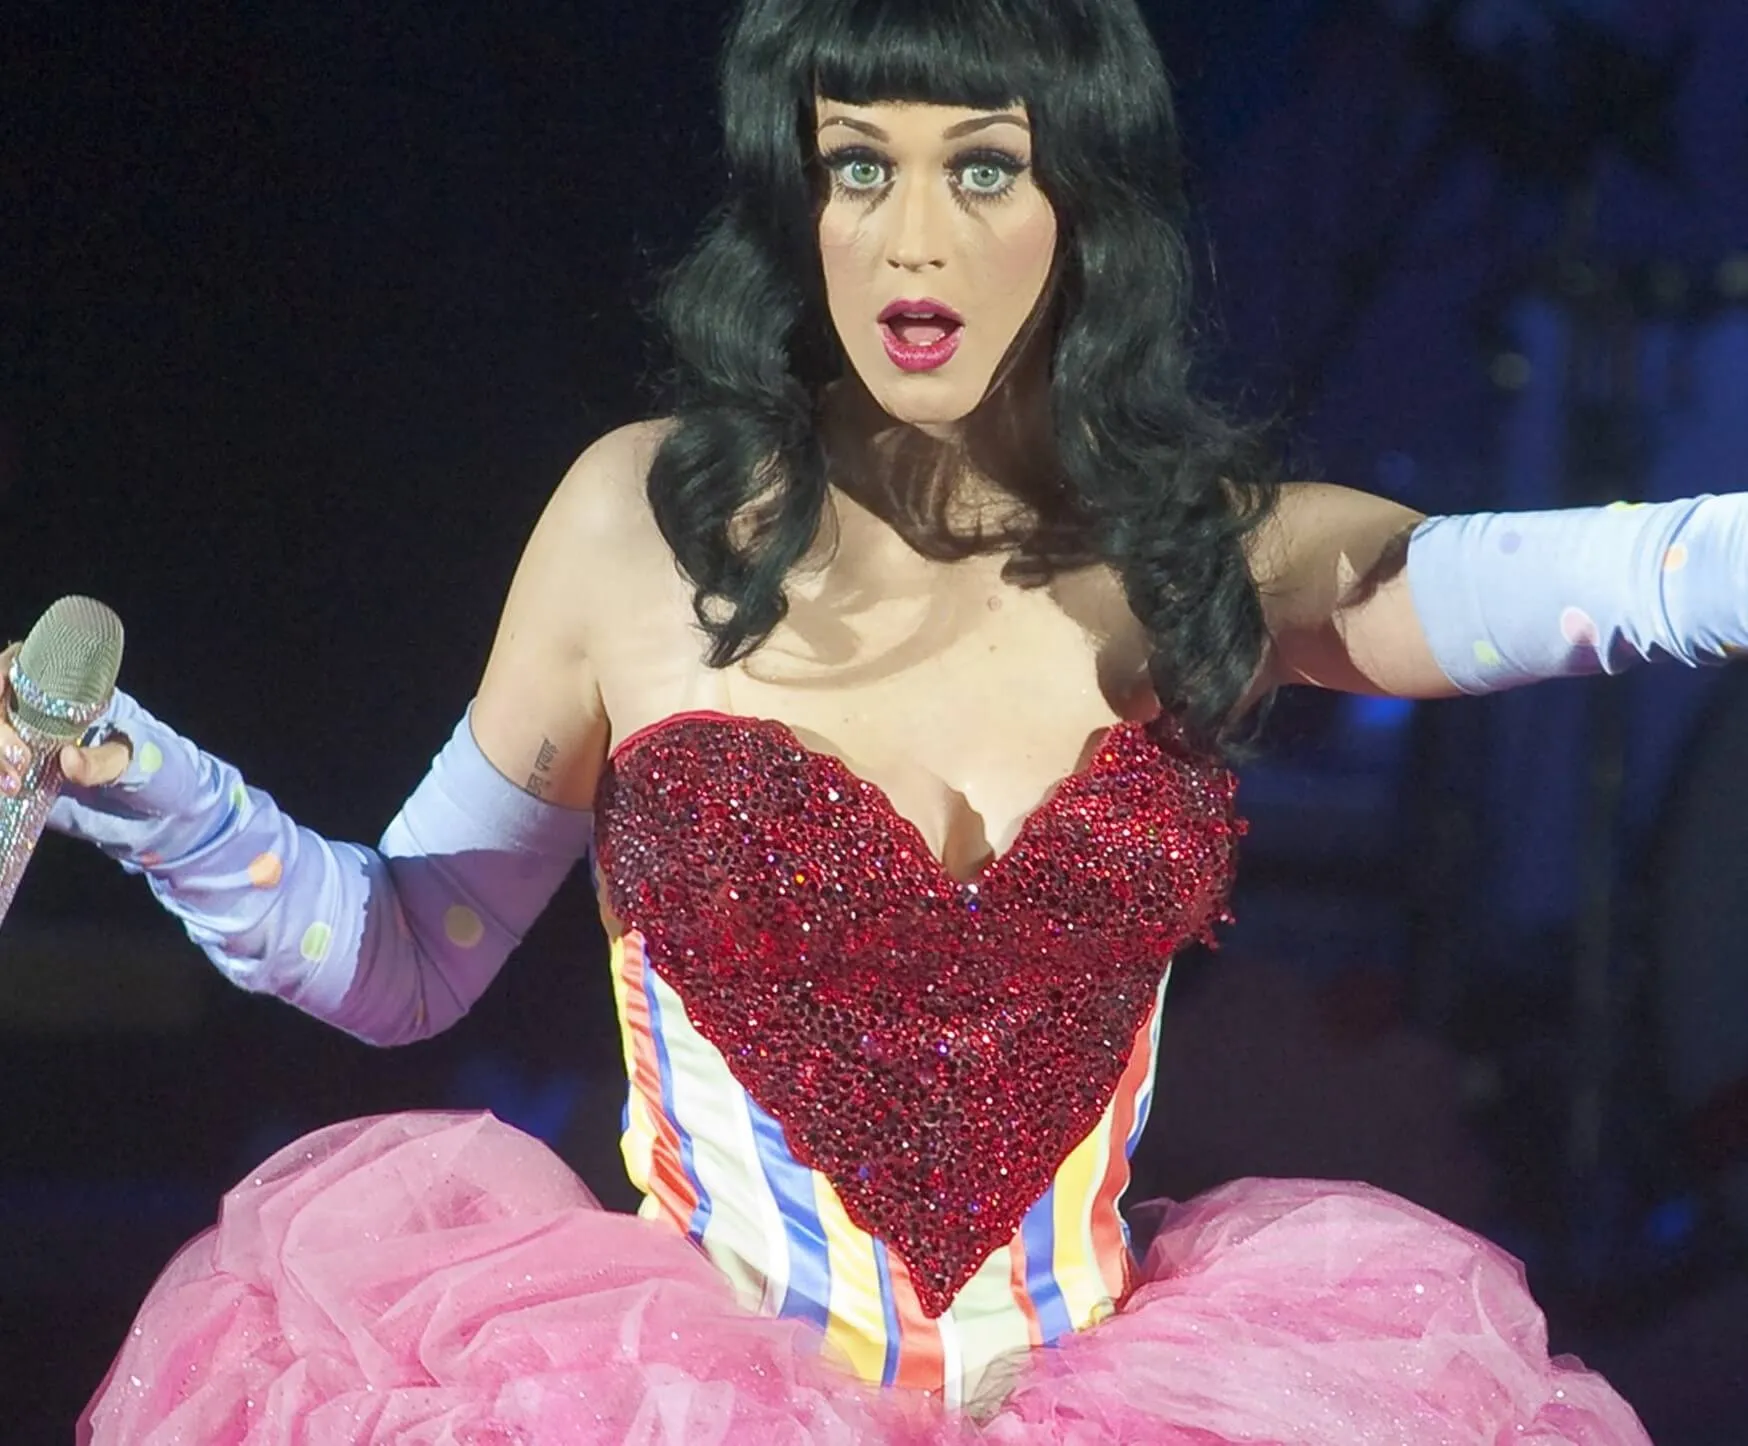 "The One That Got Away" star Katy Perry wearing red and pink